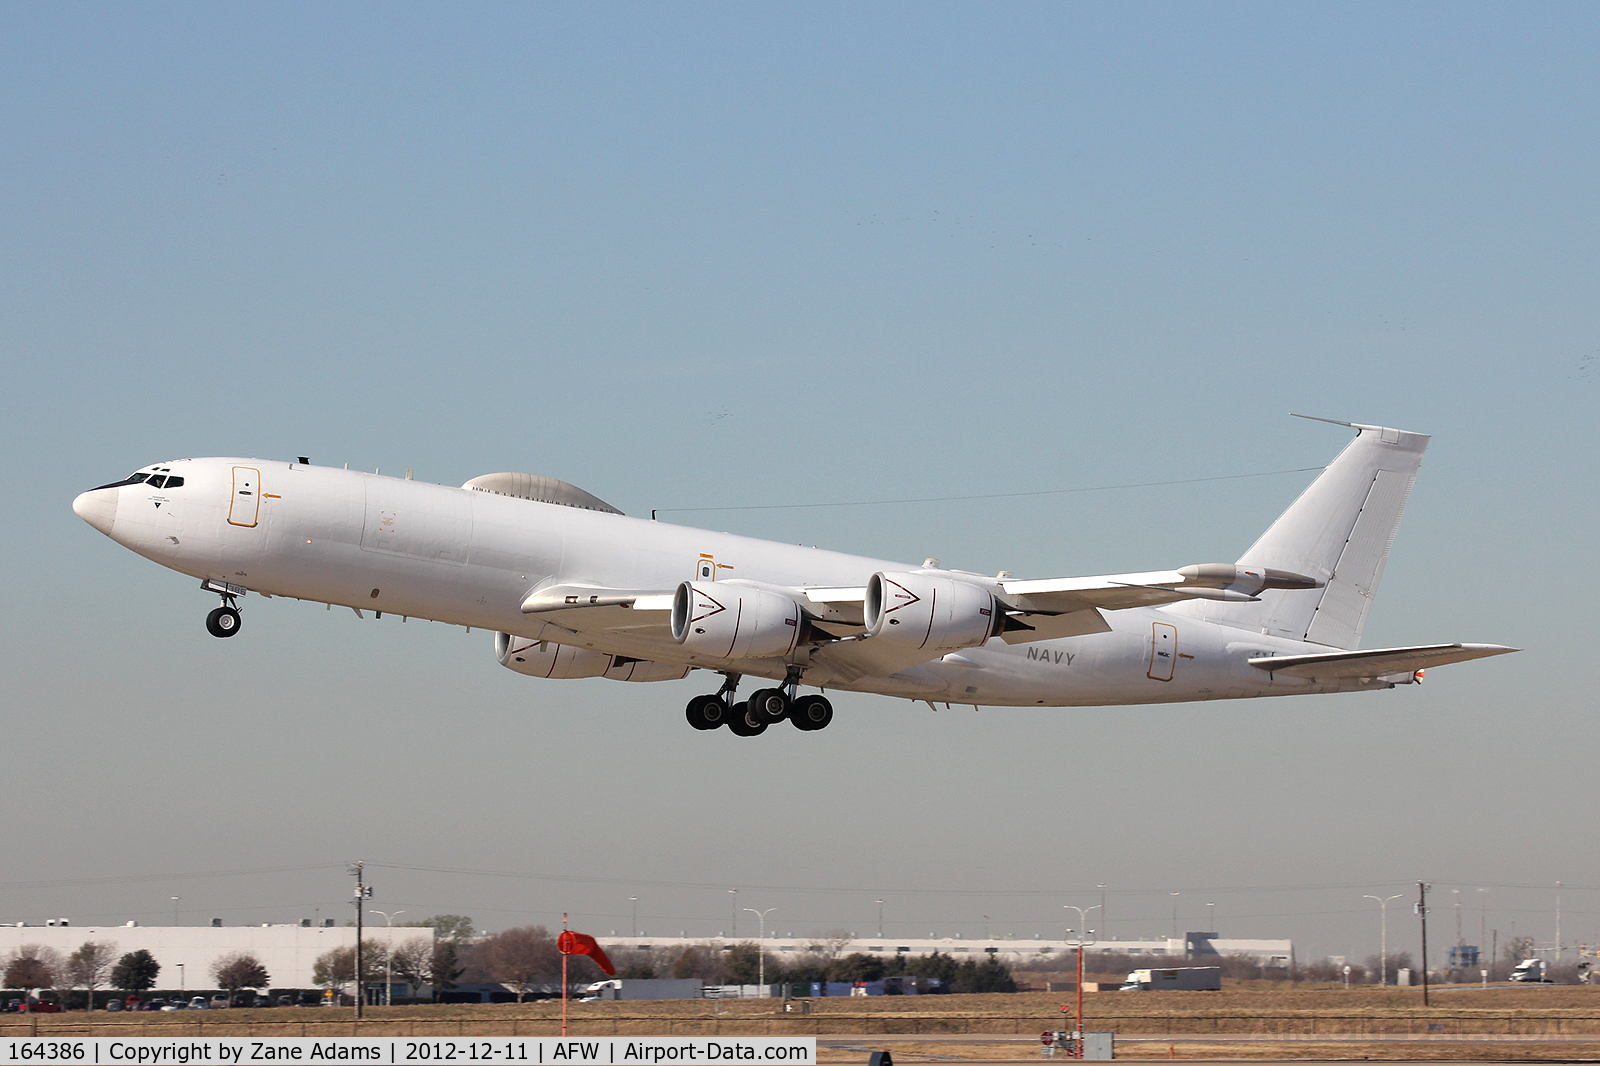 164386, 1989 Boeing E-6B Mercury C/N 23894, US Navy E-6B doing touch and goes at Alliance Airport - Fort Worth, TX